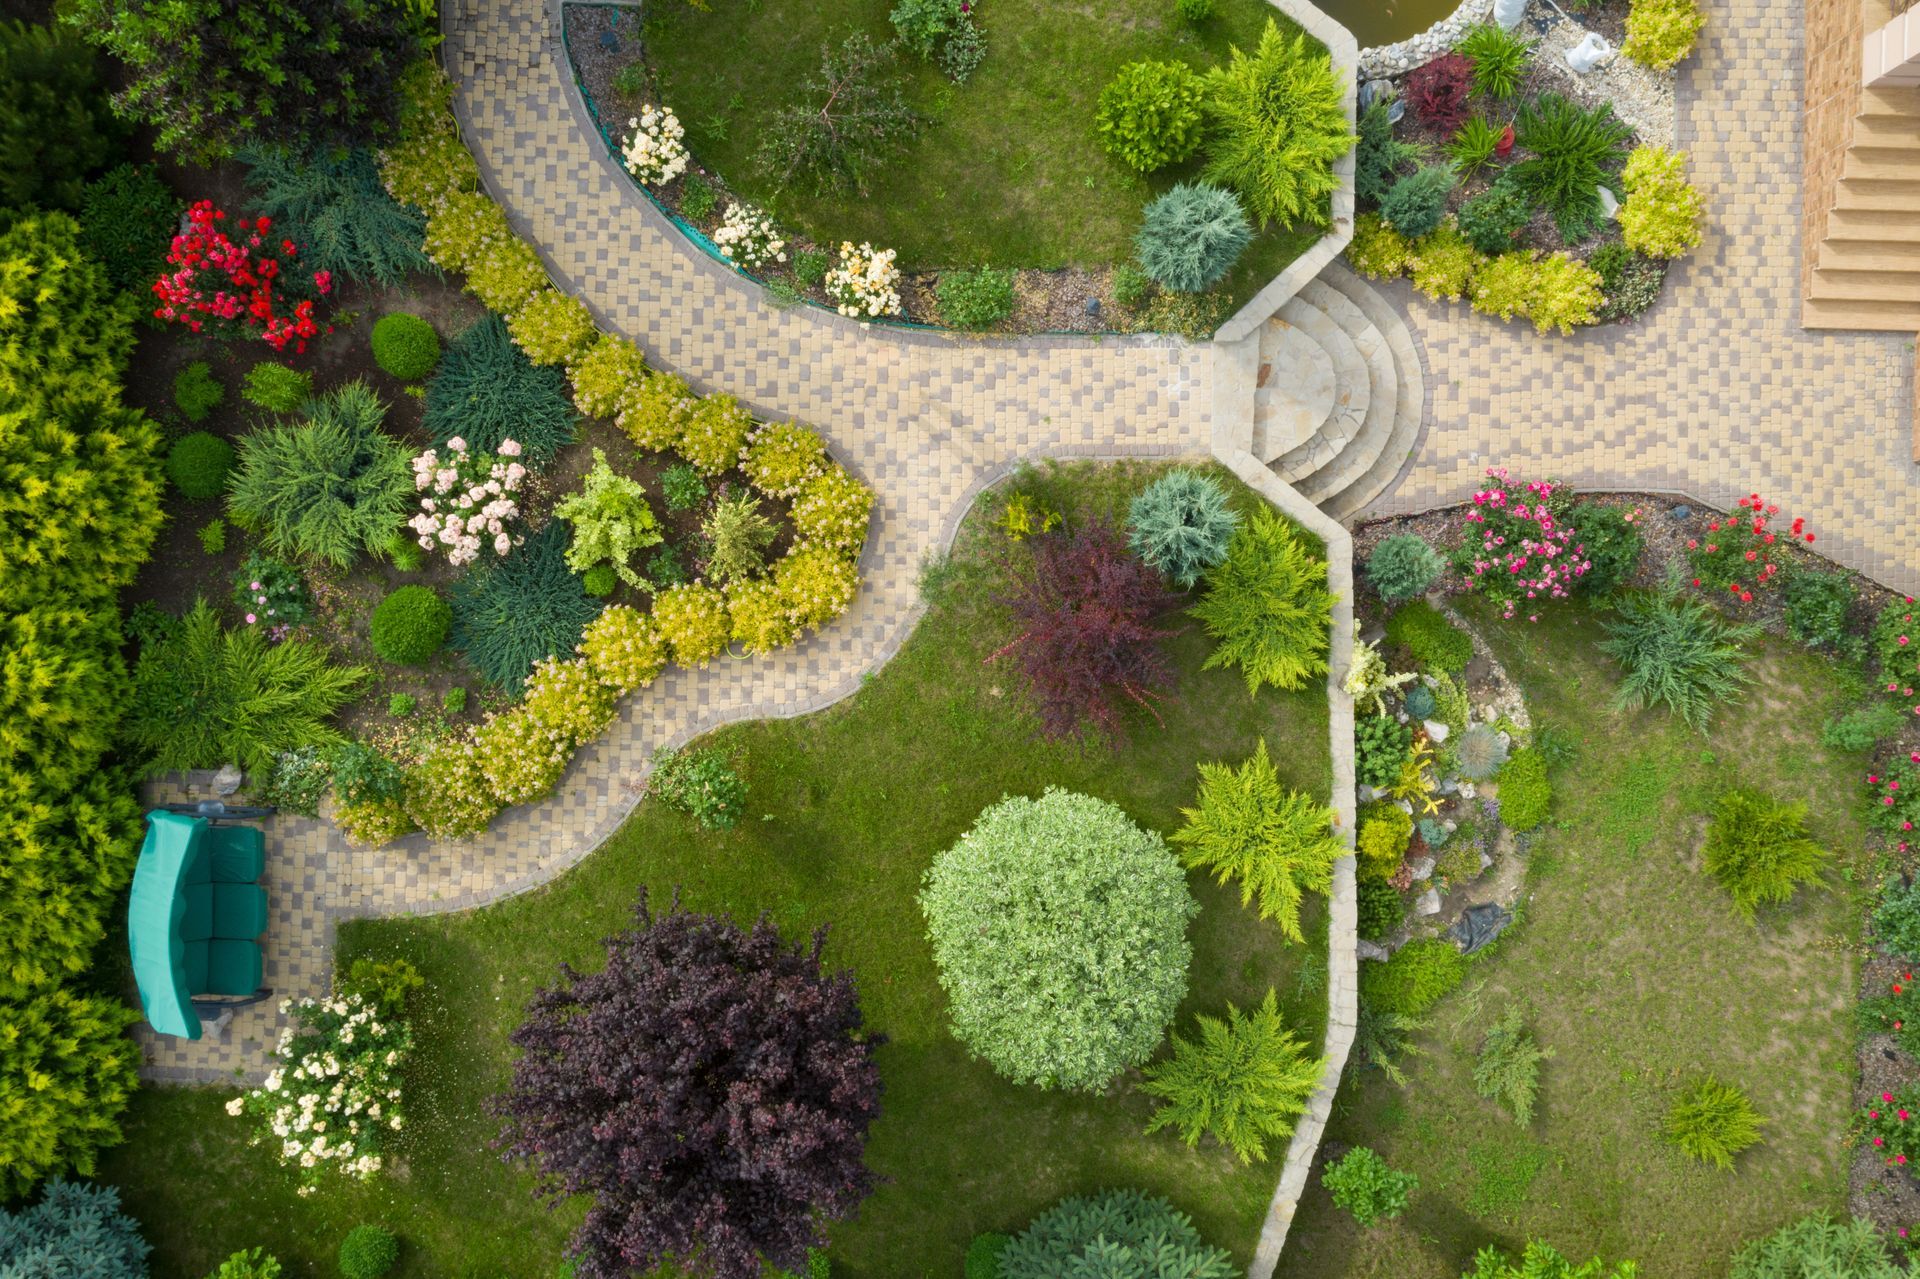 Landscape Design Trends for Creating Comfortable and Functional Spaces